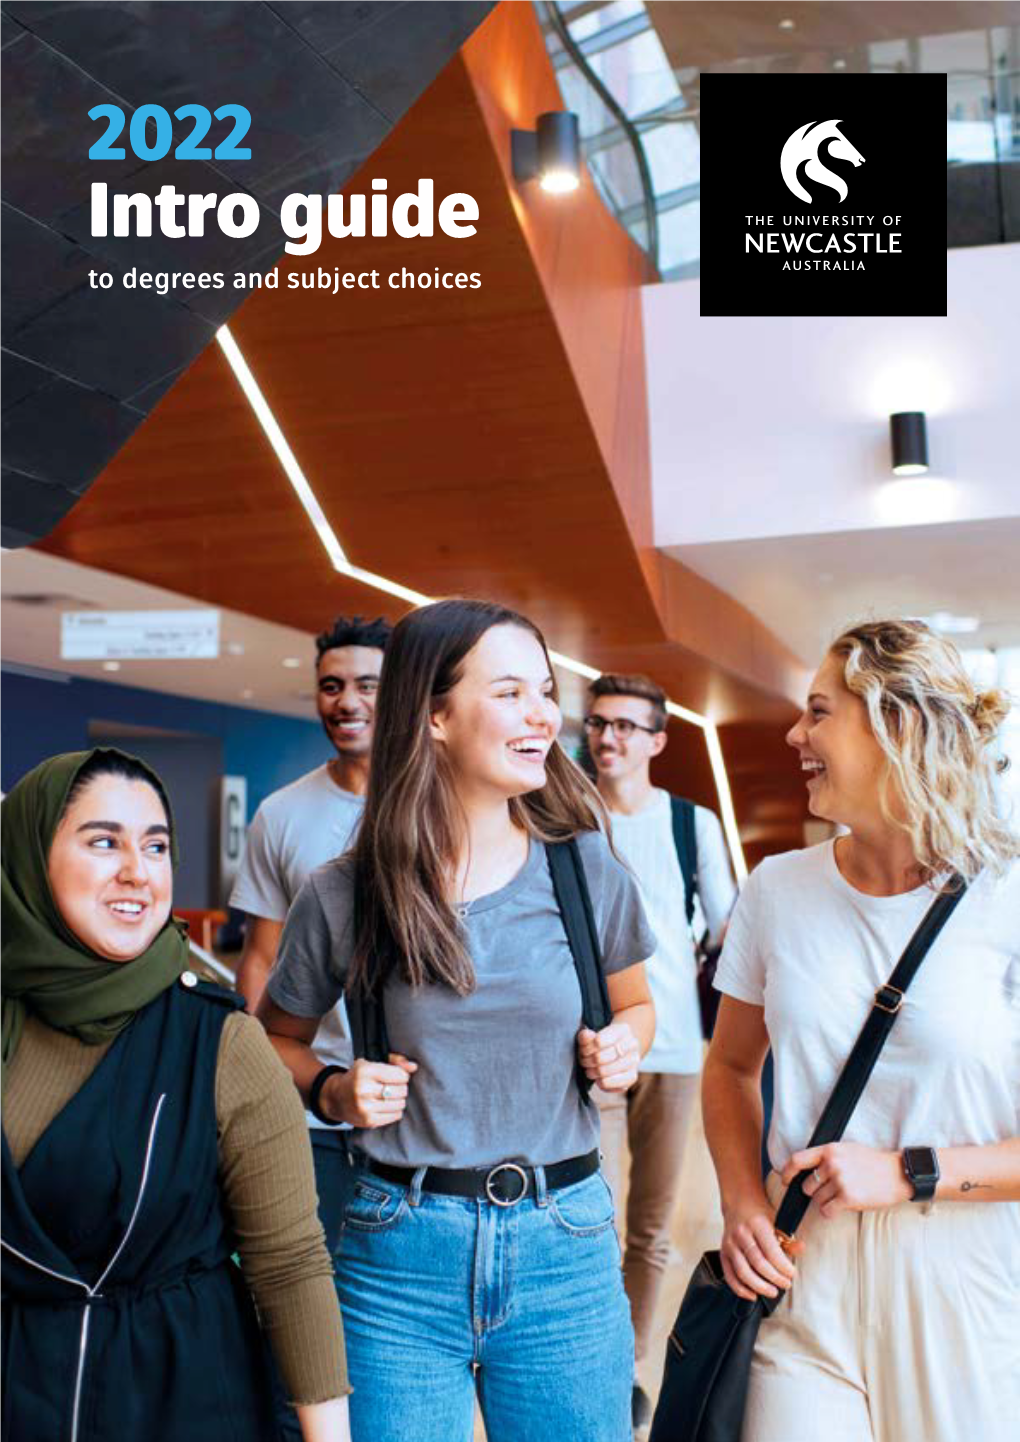 2022 Intro Guide to Degrees and Subject Choices